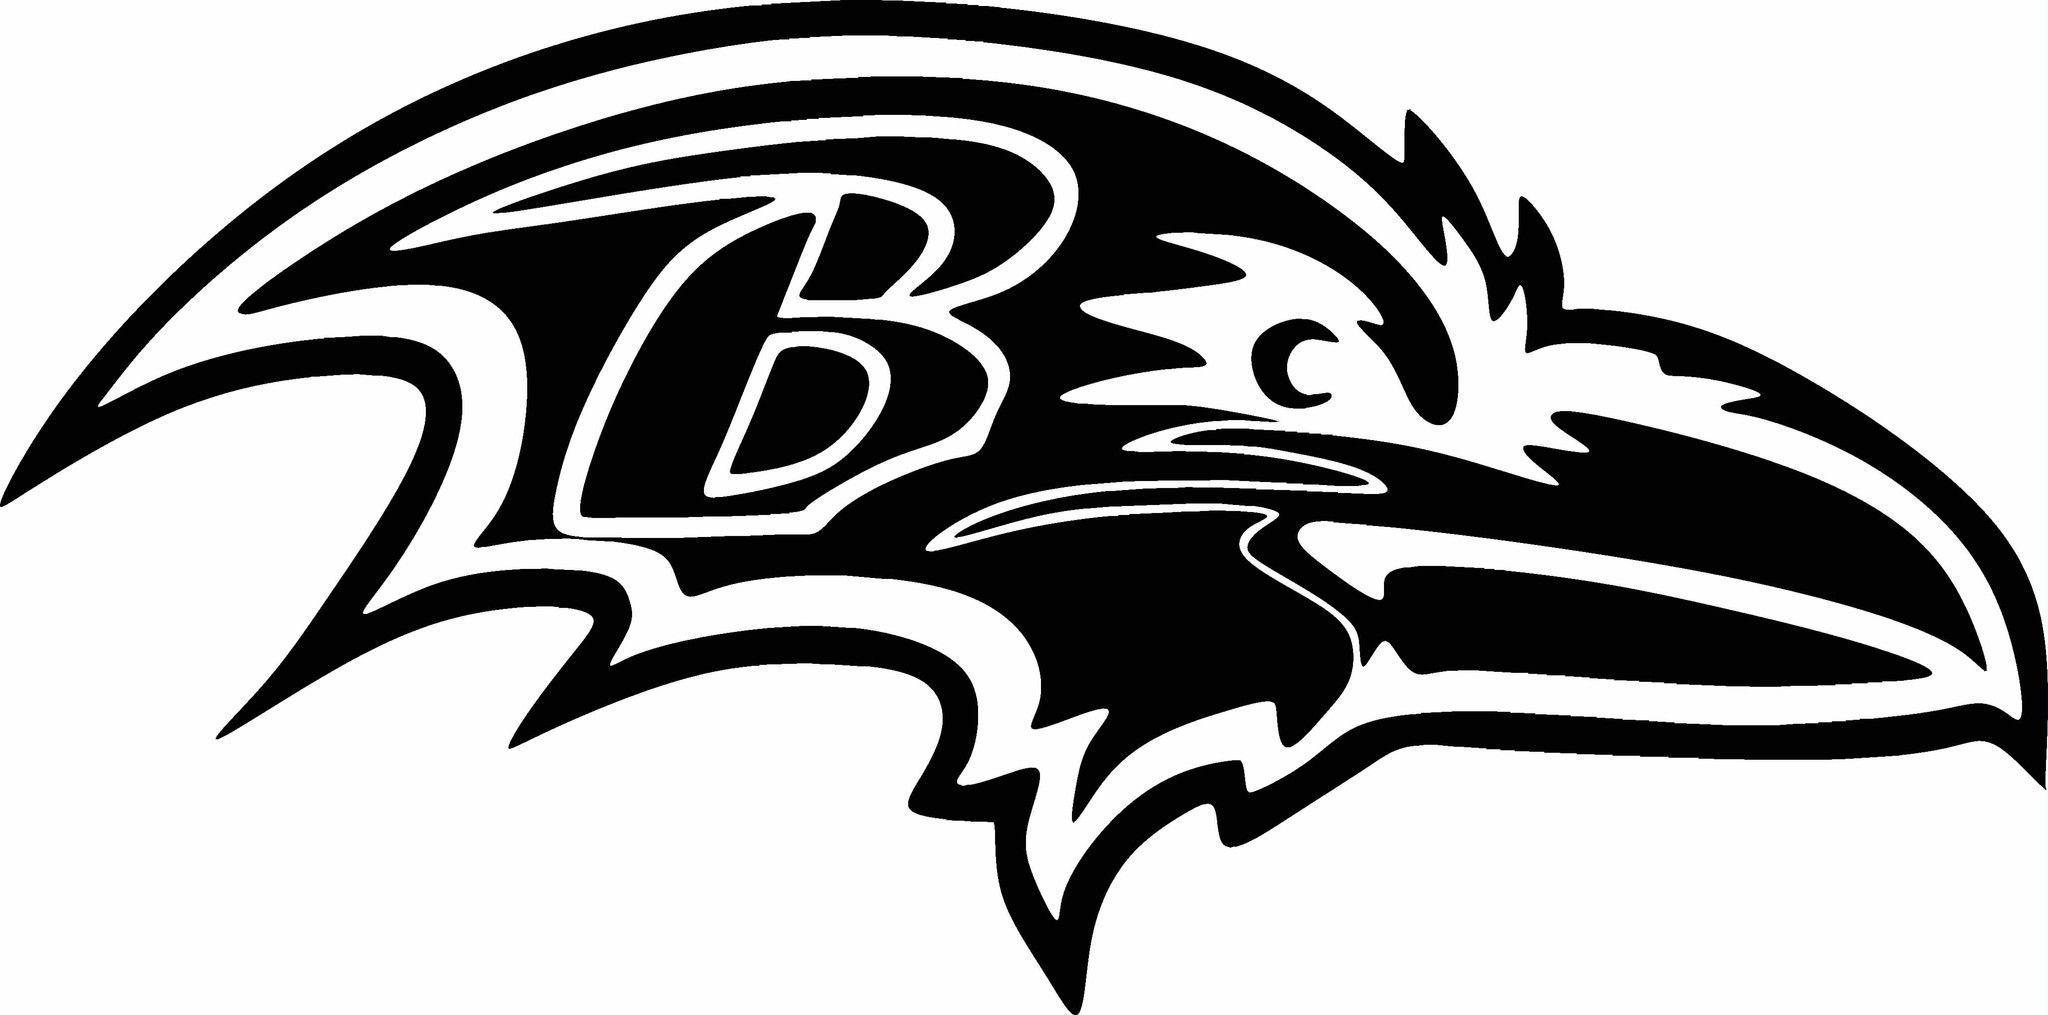 Black and White Ravens Logo - Baltimore Ravens LOGO Vinyl Cut Out Decal your Color